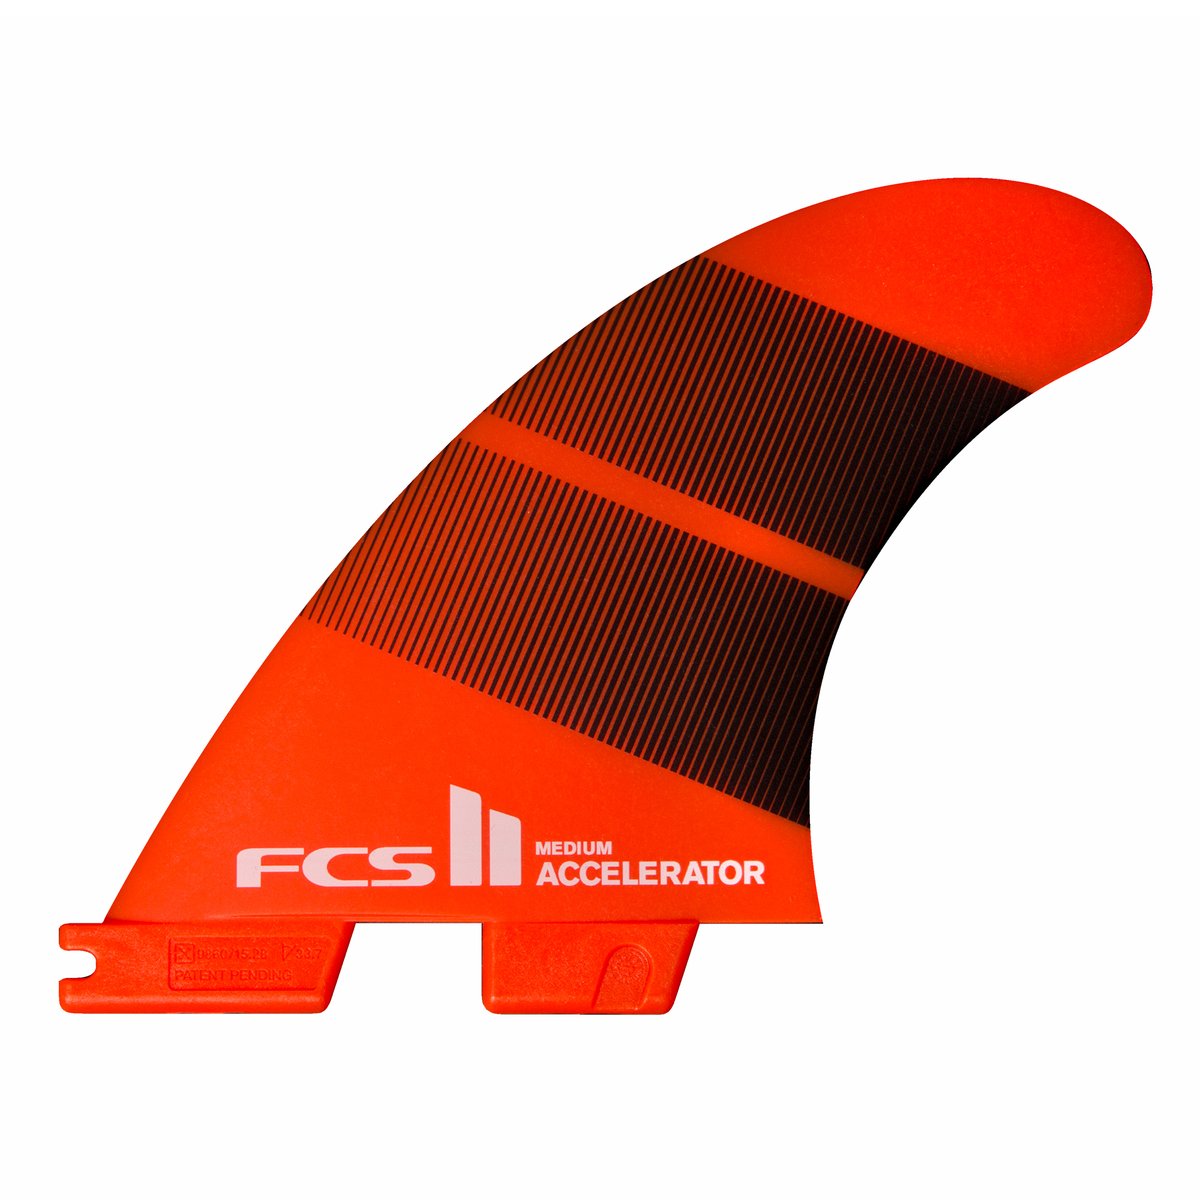 FCS II Accelerator Neo Glass Large Thruster Fins - Tang Gradient Fins